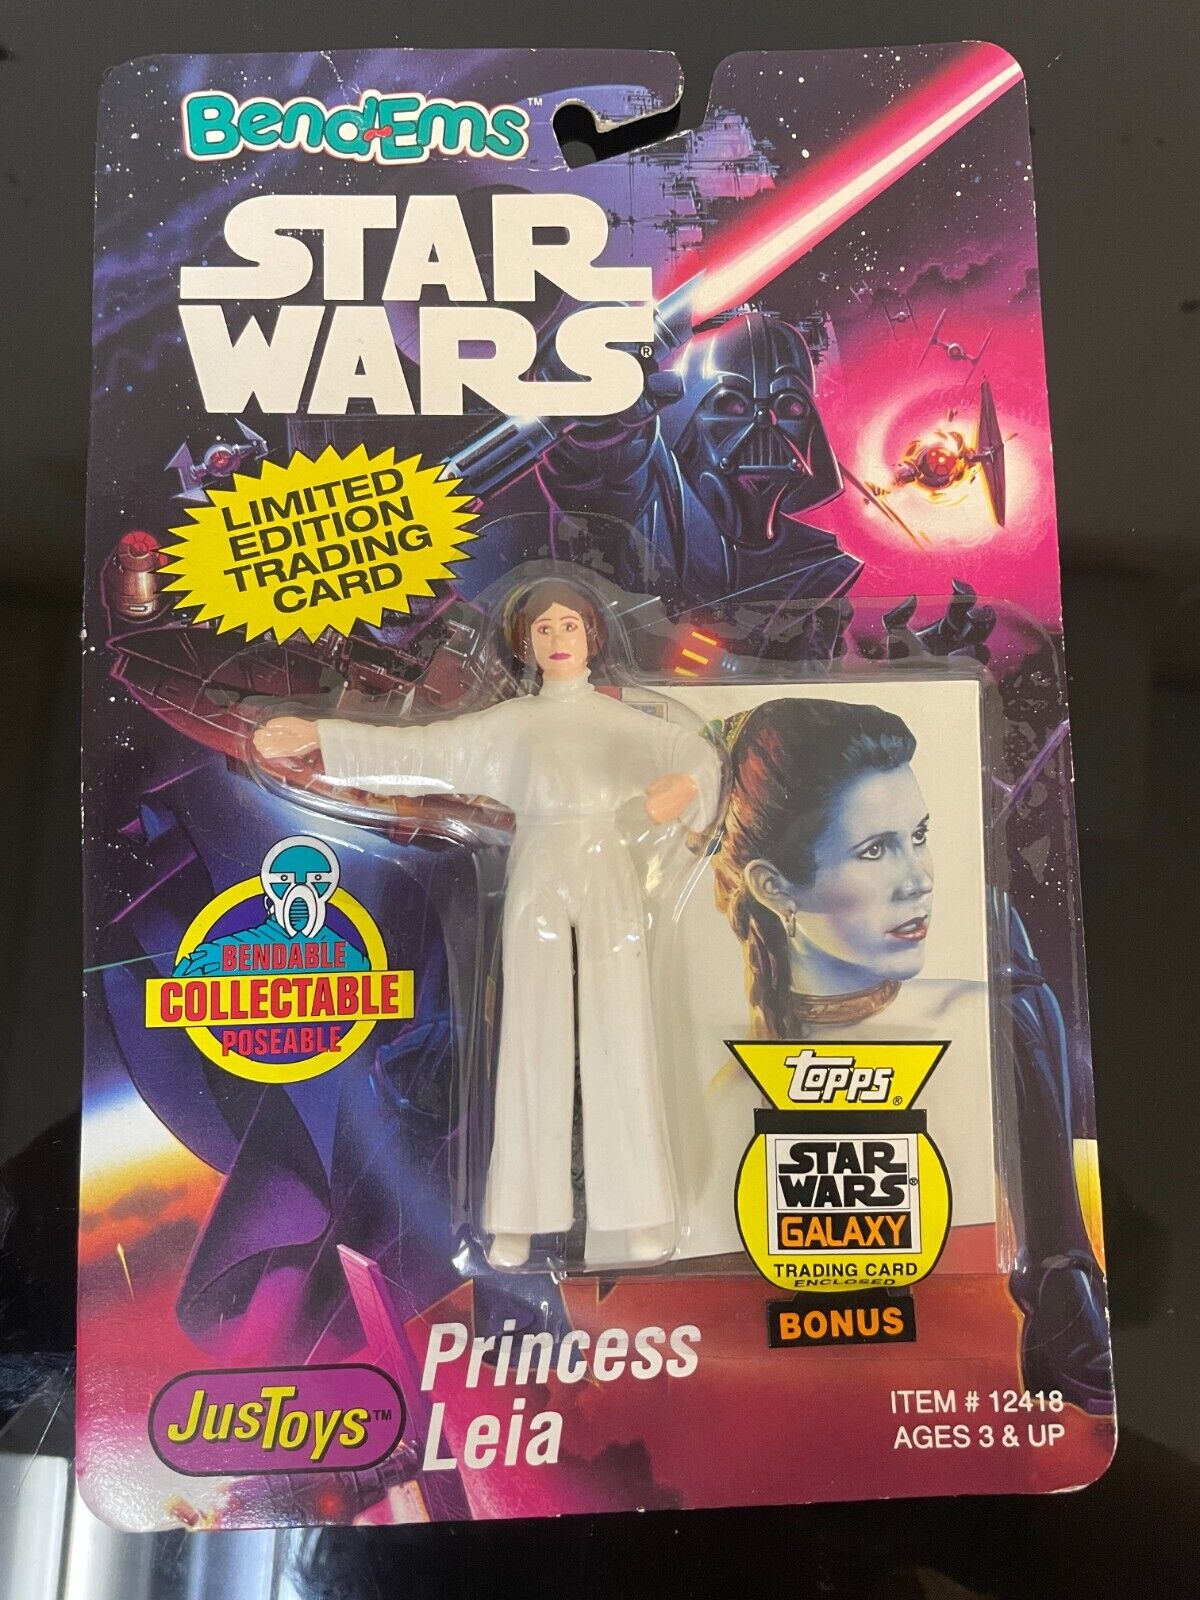 NEW Star Wars Princess Leia BendEms Posable Action Figure and Topps Trading Card